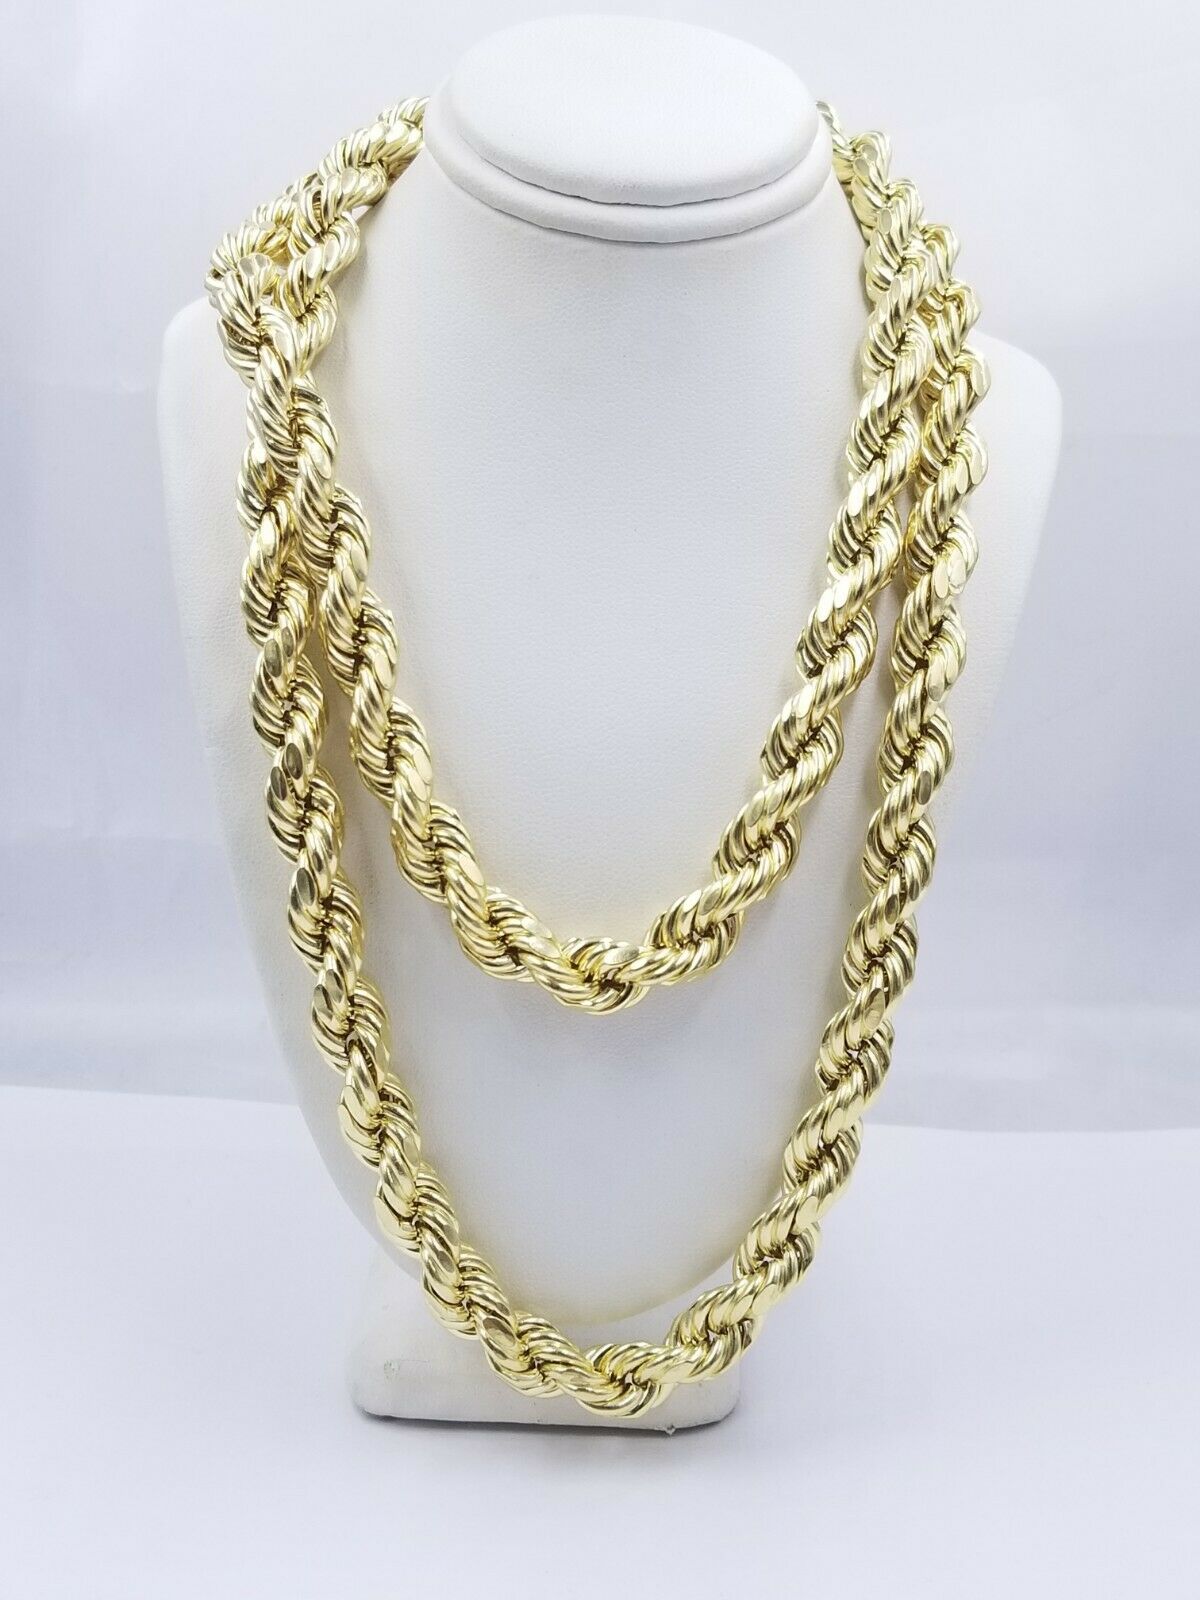 Men's Women's Real 10k Yellow Gold Solid Rope Chain Necklace 1.5mm-6mm